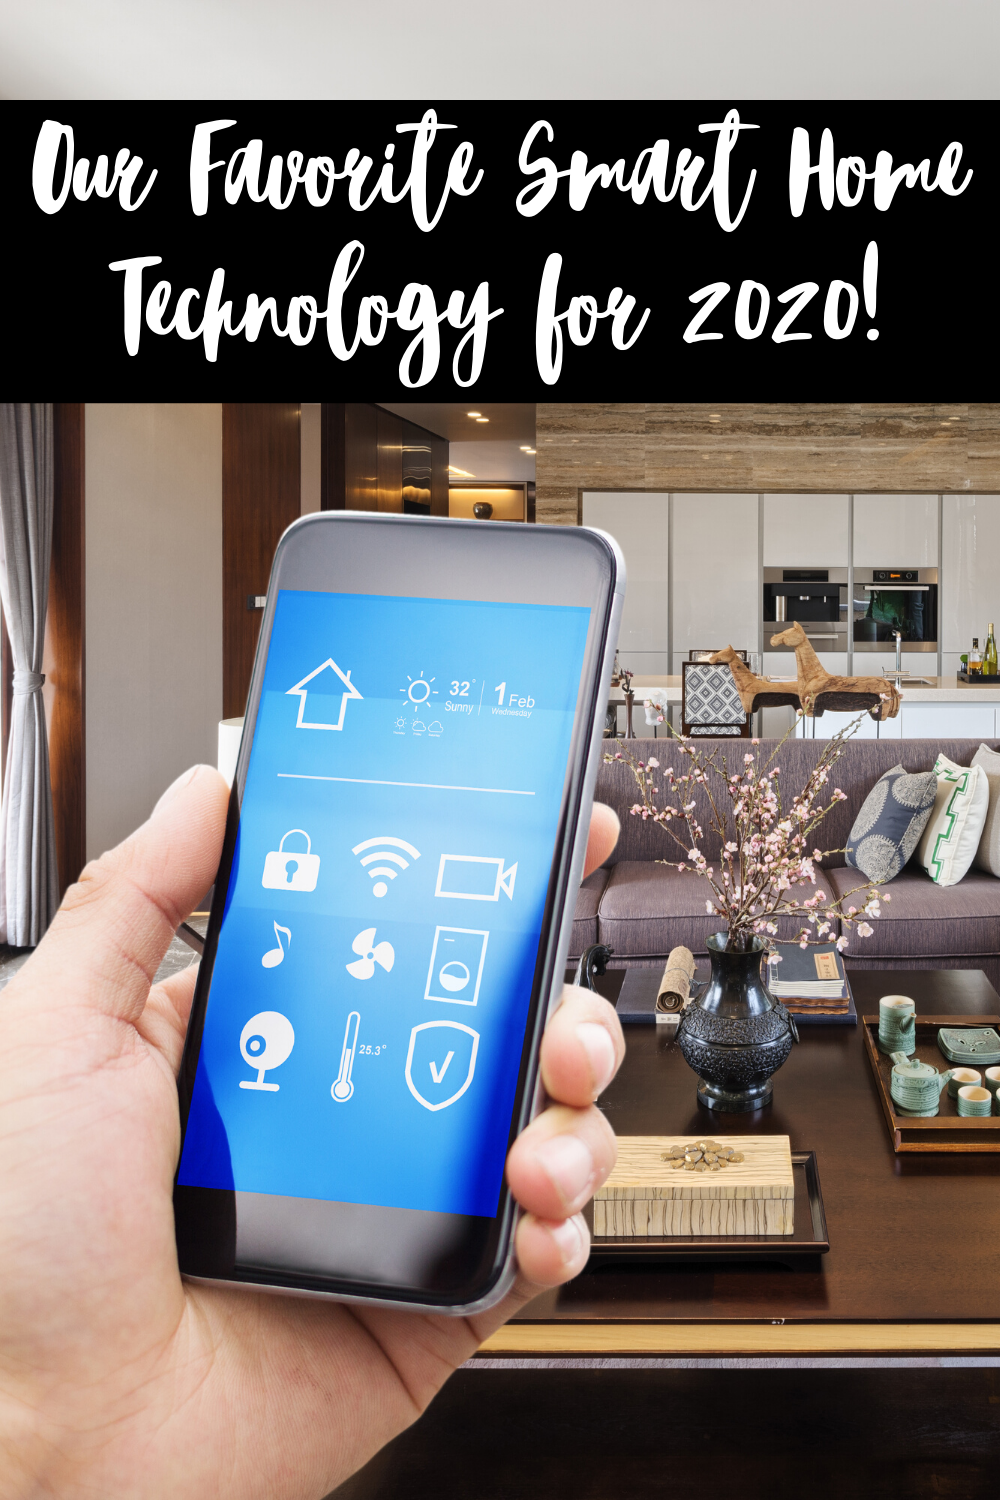 Do you have any smart home technology? If not, you'll want to check out these options below. They're easy updates that you can make to increase your home value, security, and efficiency. If you are looking for renovated apartments in Tucson make sure to check out the section on our MCLife communities that are getting updates and these smart home technology additions!